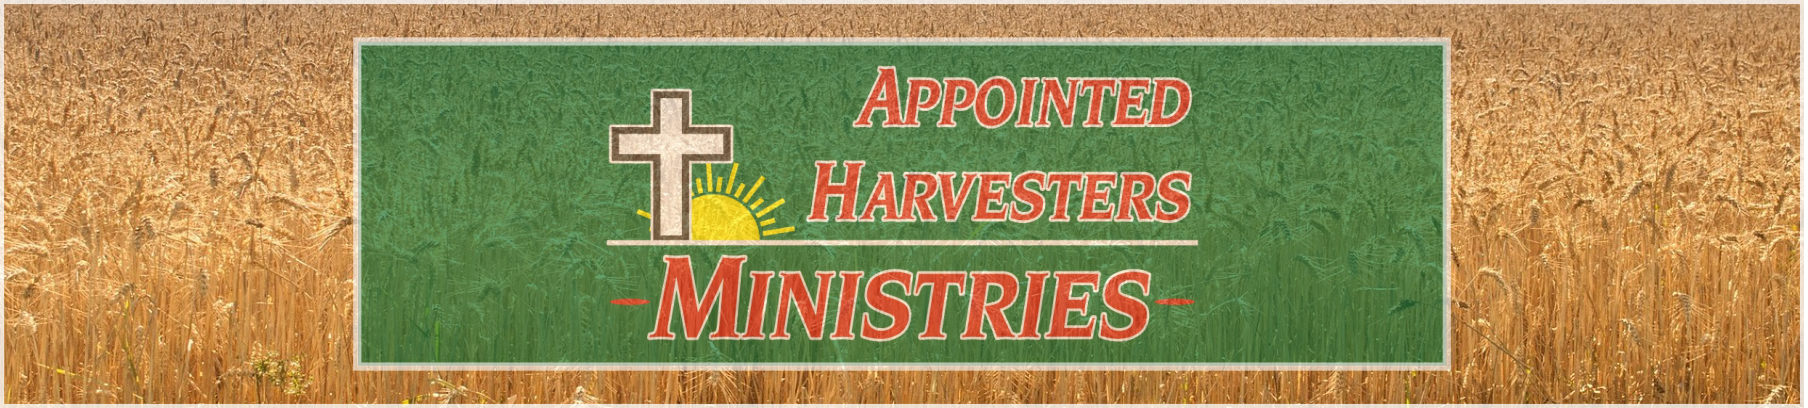 Appointed Harvesters Ministries